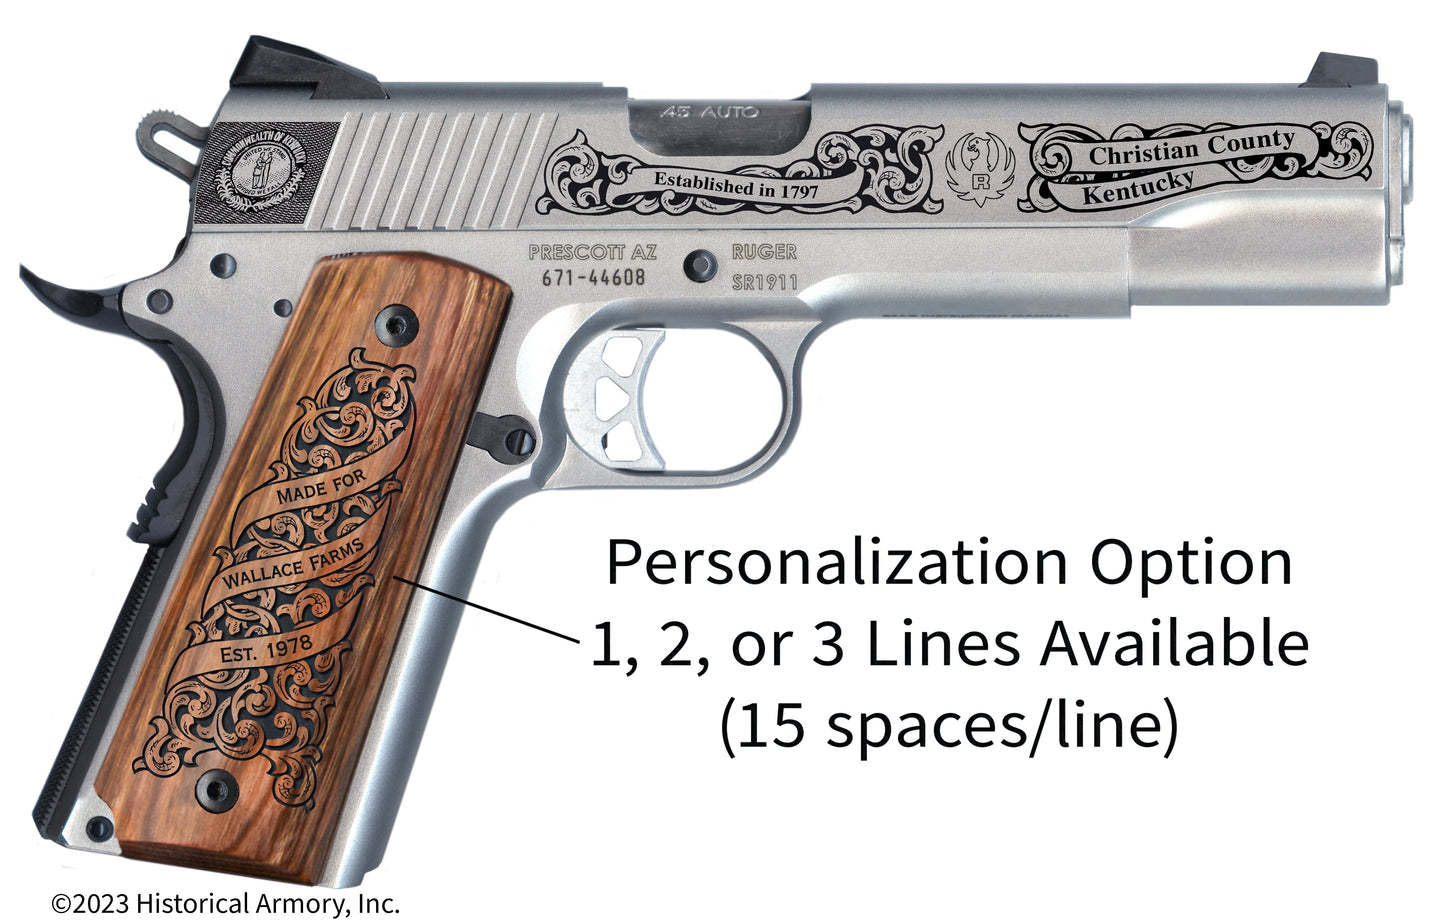 Christian County Kentucky Personalized Engraved .45 Auto Ruger 1911